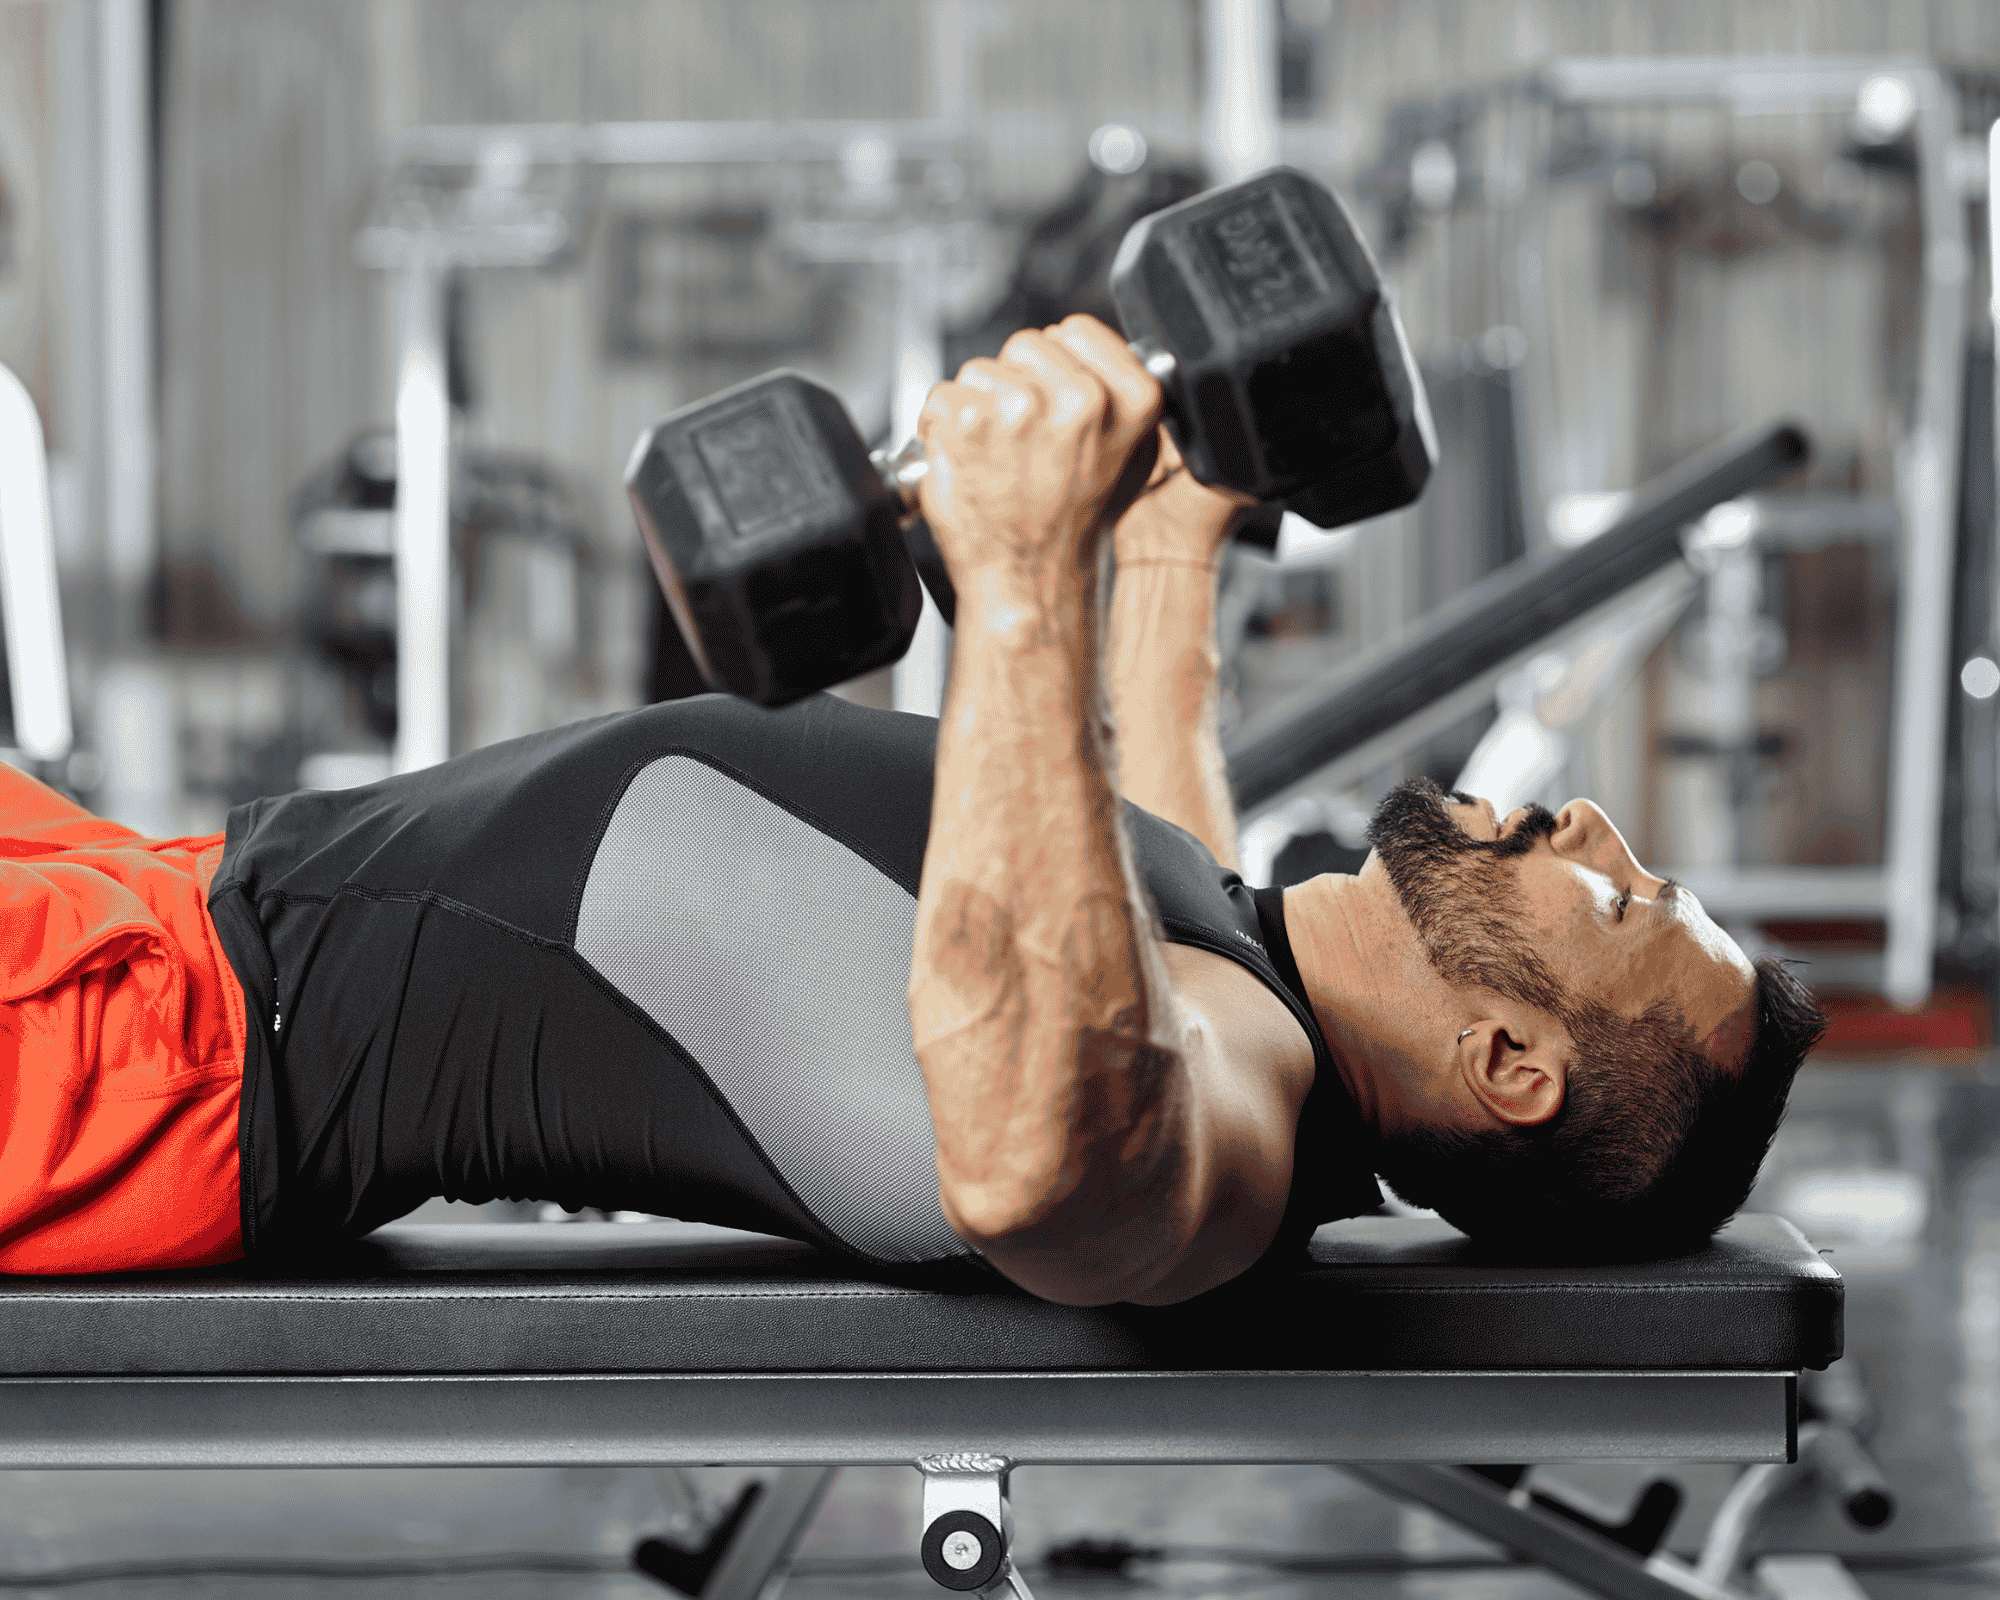 How to Do a Bodybuilding Chest Workout that Gets Results